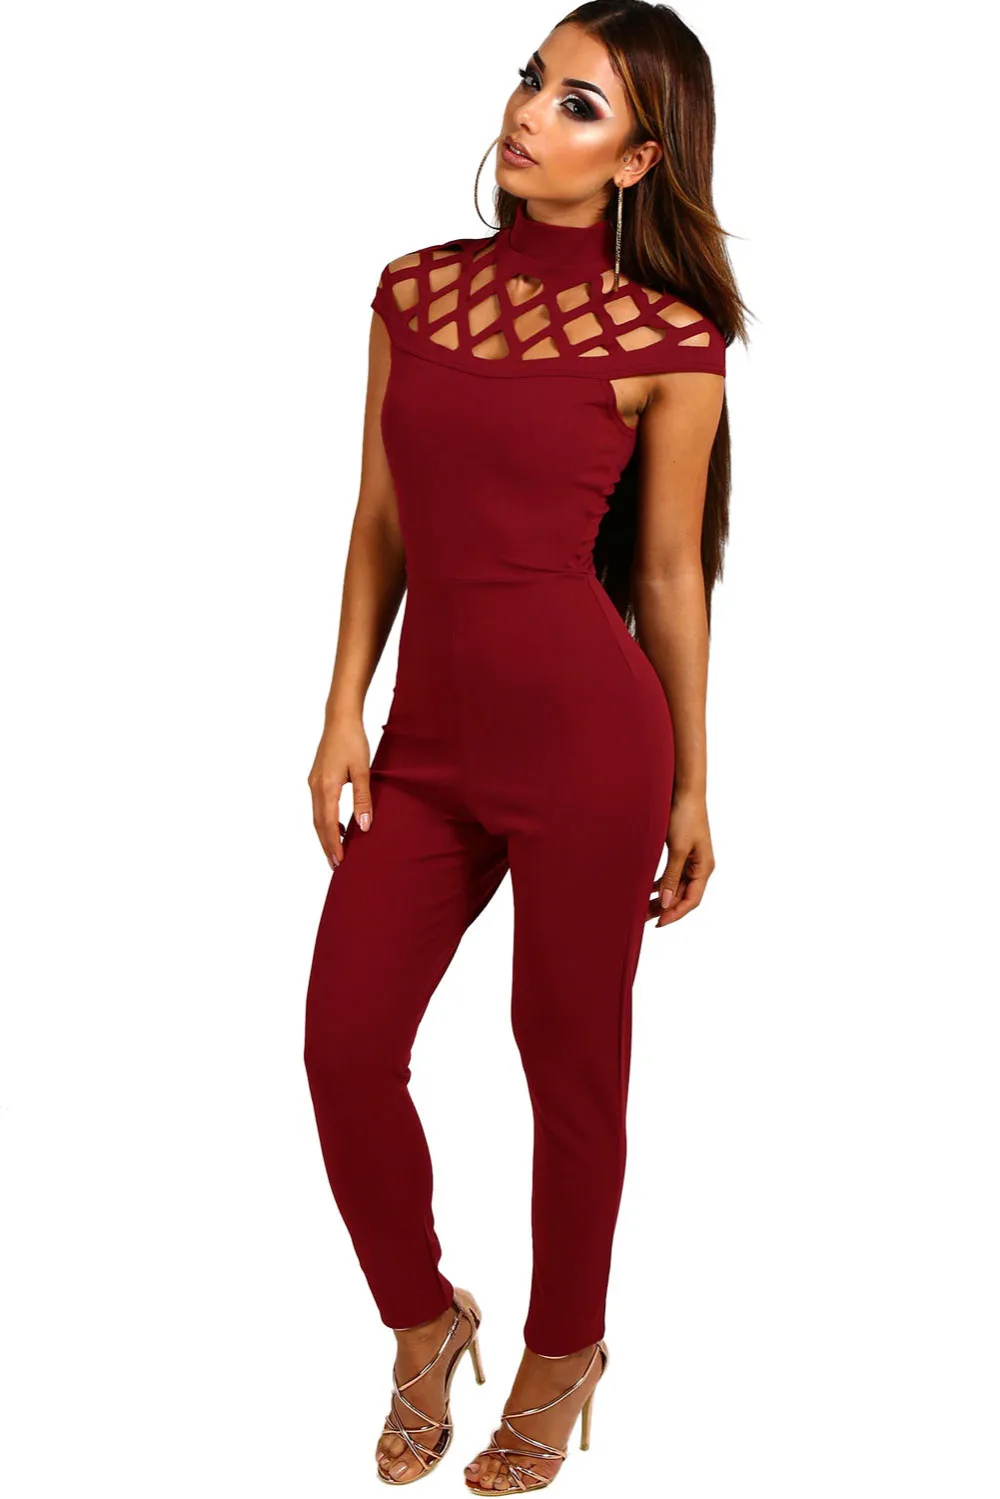 Plum-Cage-Top-Skinny-Fit-Jumpsuit-LC64260-3-1